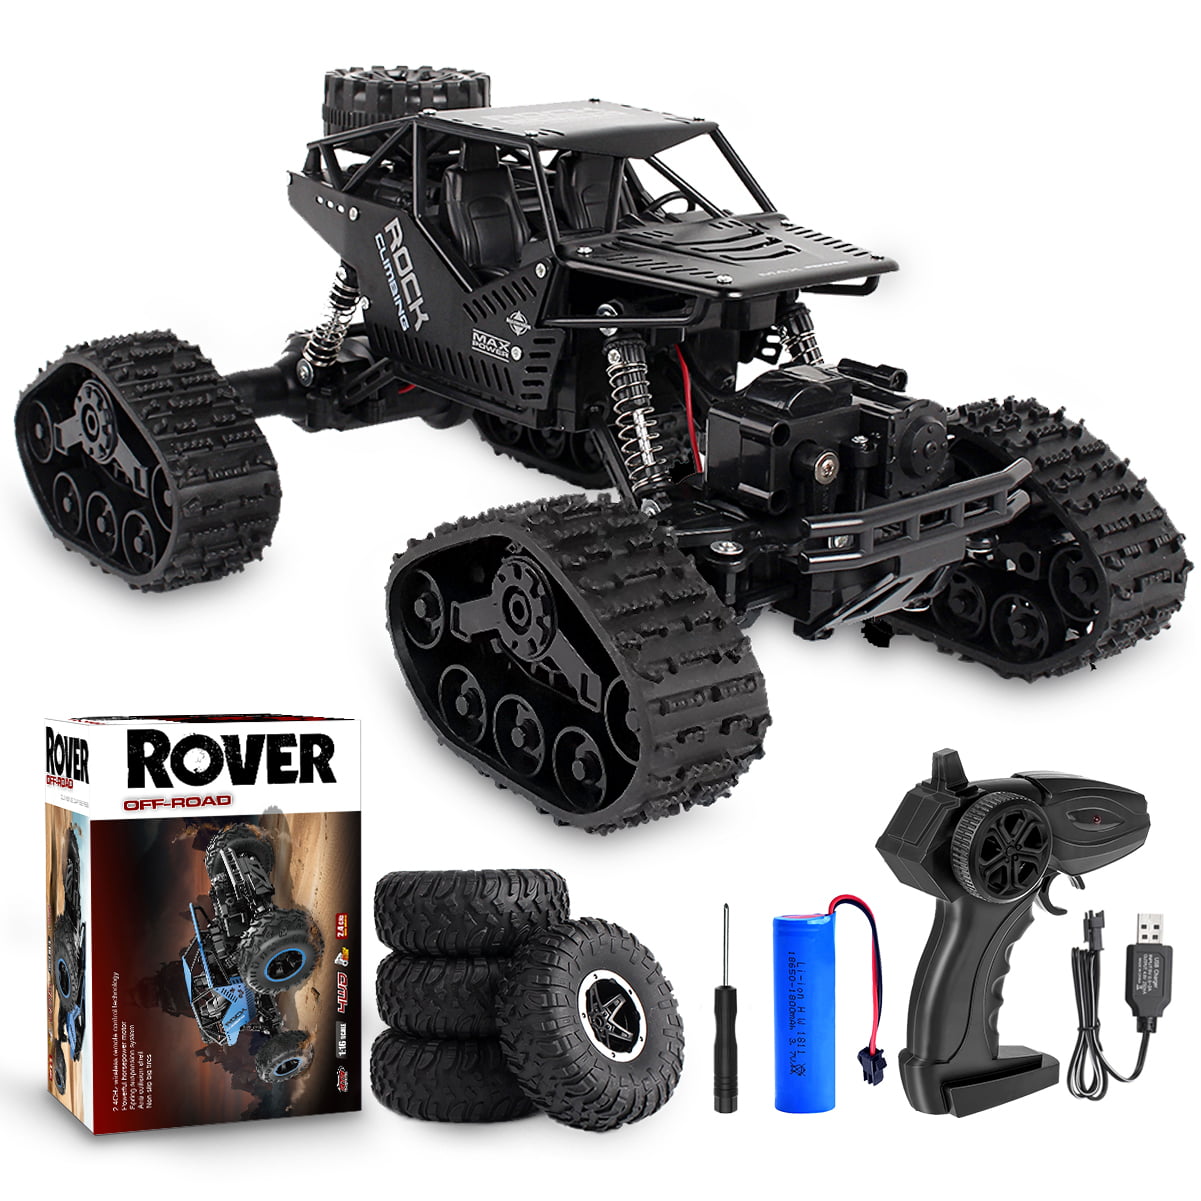 Green 4DRC C8 Remote Control Truck 2.4Ghz 25KM/H High Speed RTR Electric Rock Climber Fast Race Buggy Hobby Cars Toy for Kids Gift